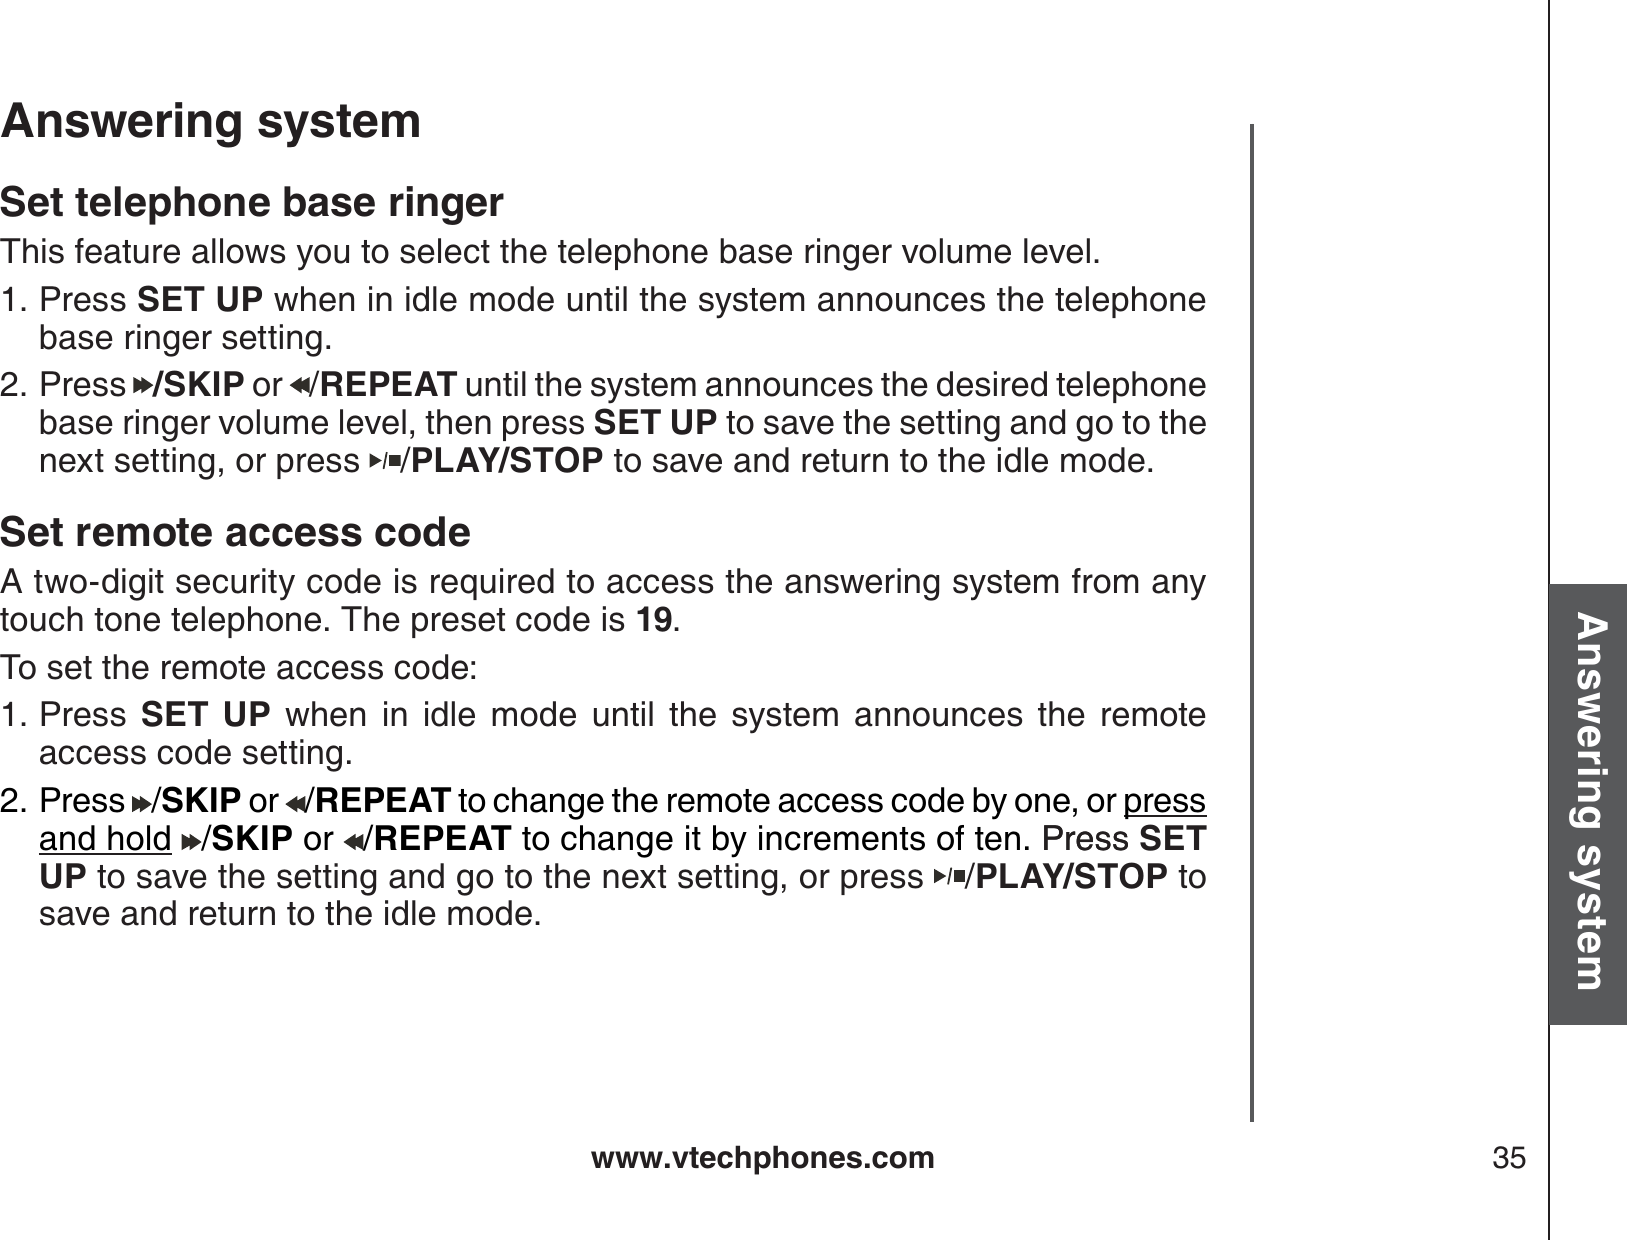 www.vtechphones.com 35Basic operationAnswering systemAnswering system Set telephone base ringerThis feature allows you to select the telephone base ringer volume level.  Press SET UP when in idle mode until the system announces the telephone base ringer setting.Press  /SKIP or  /REPEAT until the system announces the desired telephone base ringer volume level, then press SET UP to save the setting and go to the next setting, or press  /PLAY/STOP to save and return to the idle mode.Set remote access code A two-digit security code is required to access the answering system from any touch tone telephone. The preset code is 19.To set the remote access code:Press  SET UP when in idle mode until the system announces the remote access code setting.Press /SKIP or /REPEAT to change the remote access code by one, or press and hold /SKIP or /REPEAT to change it by increments of ten. PressPress SET UP to save the setting and go to the next setting, or press  /PLAY/STOP to save and return to the idle mode.1.2.1.2.